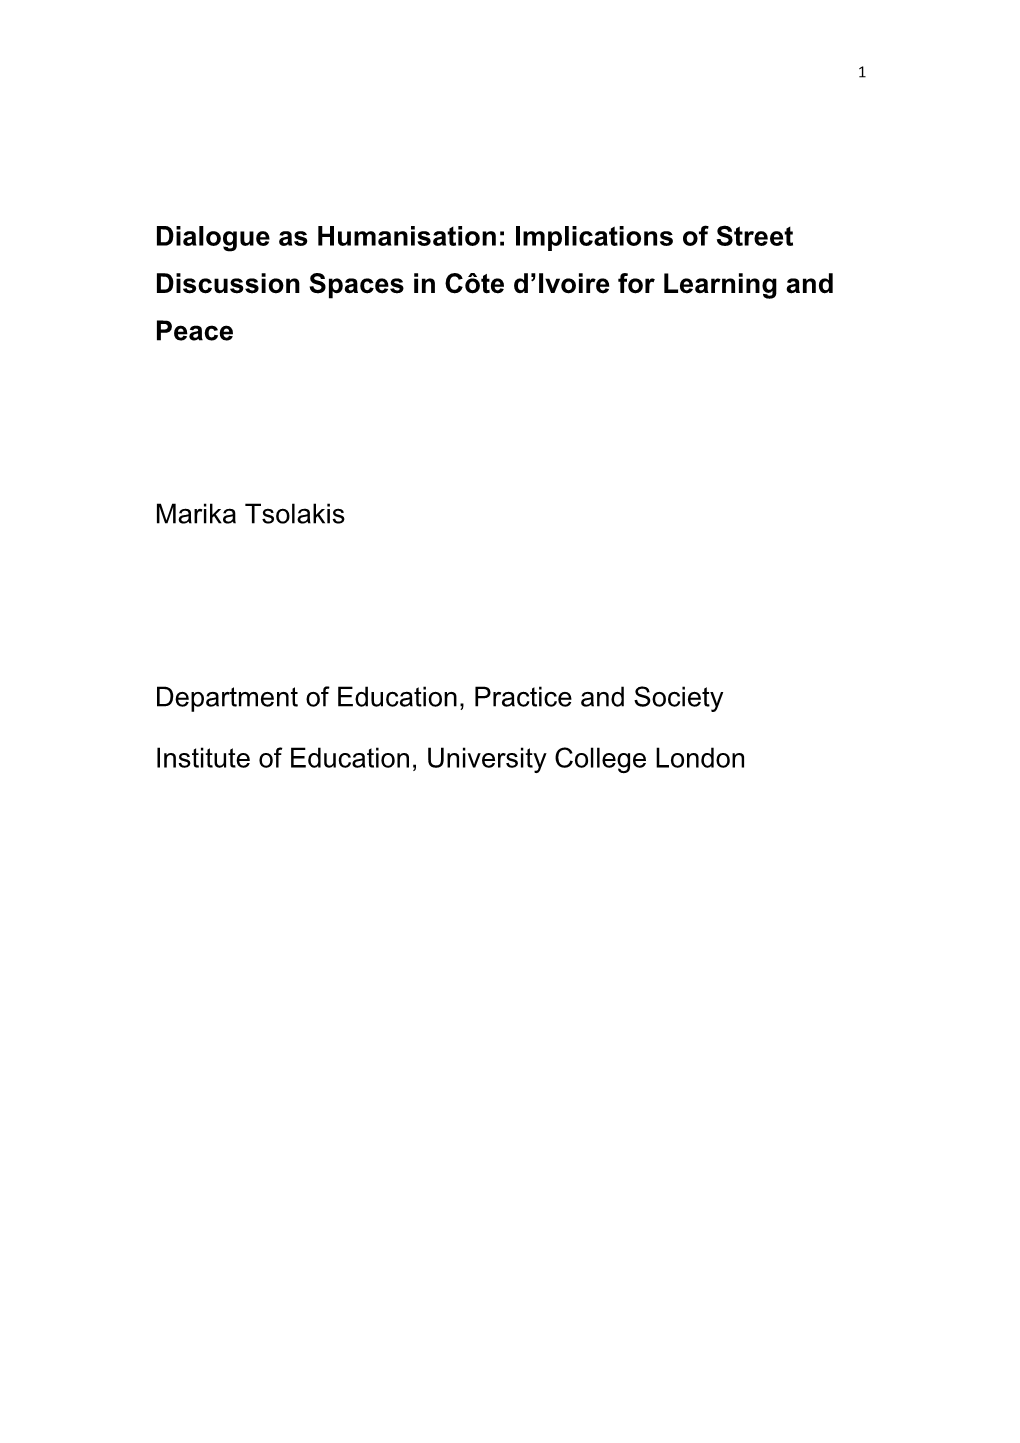 Dialogue As Humanisation: Implications of Street Discussion Spaces in Côte D’Ivoire for Learning and Peace